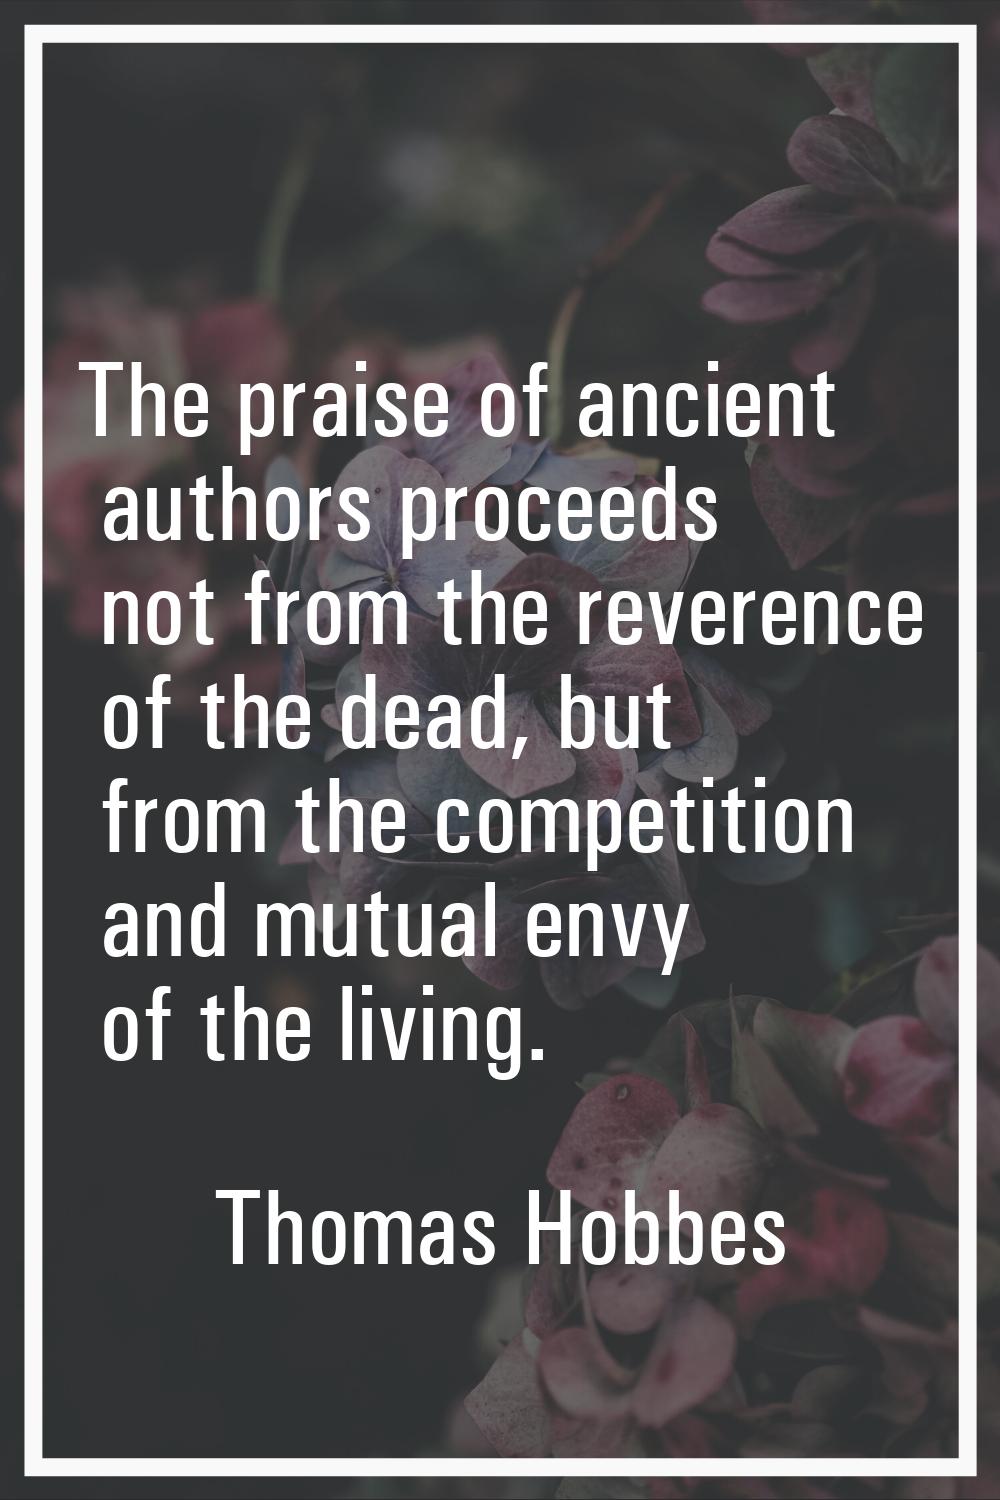 The praise of ancient authors proceeds not from the reverence of the dead, but from the competition